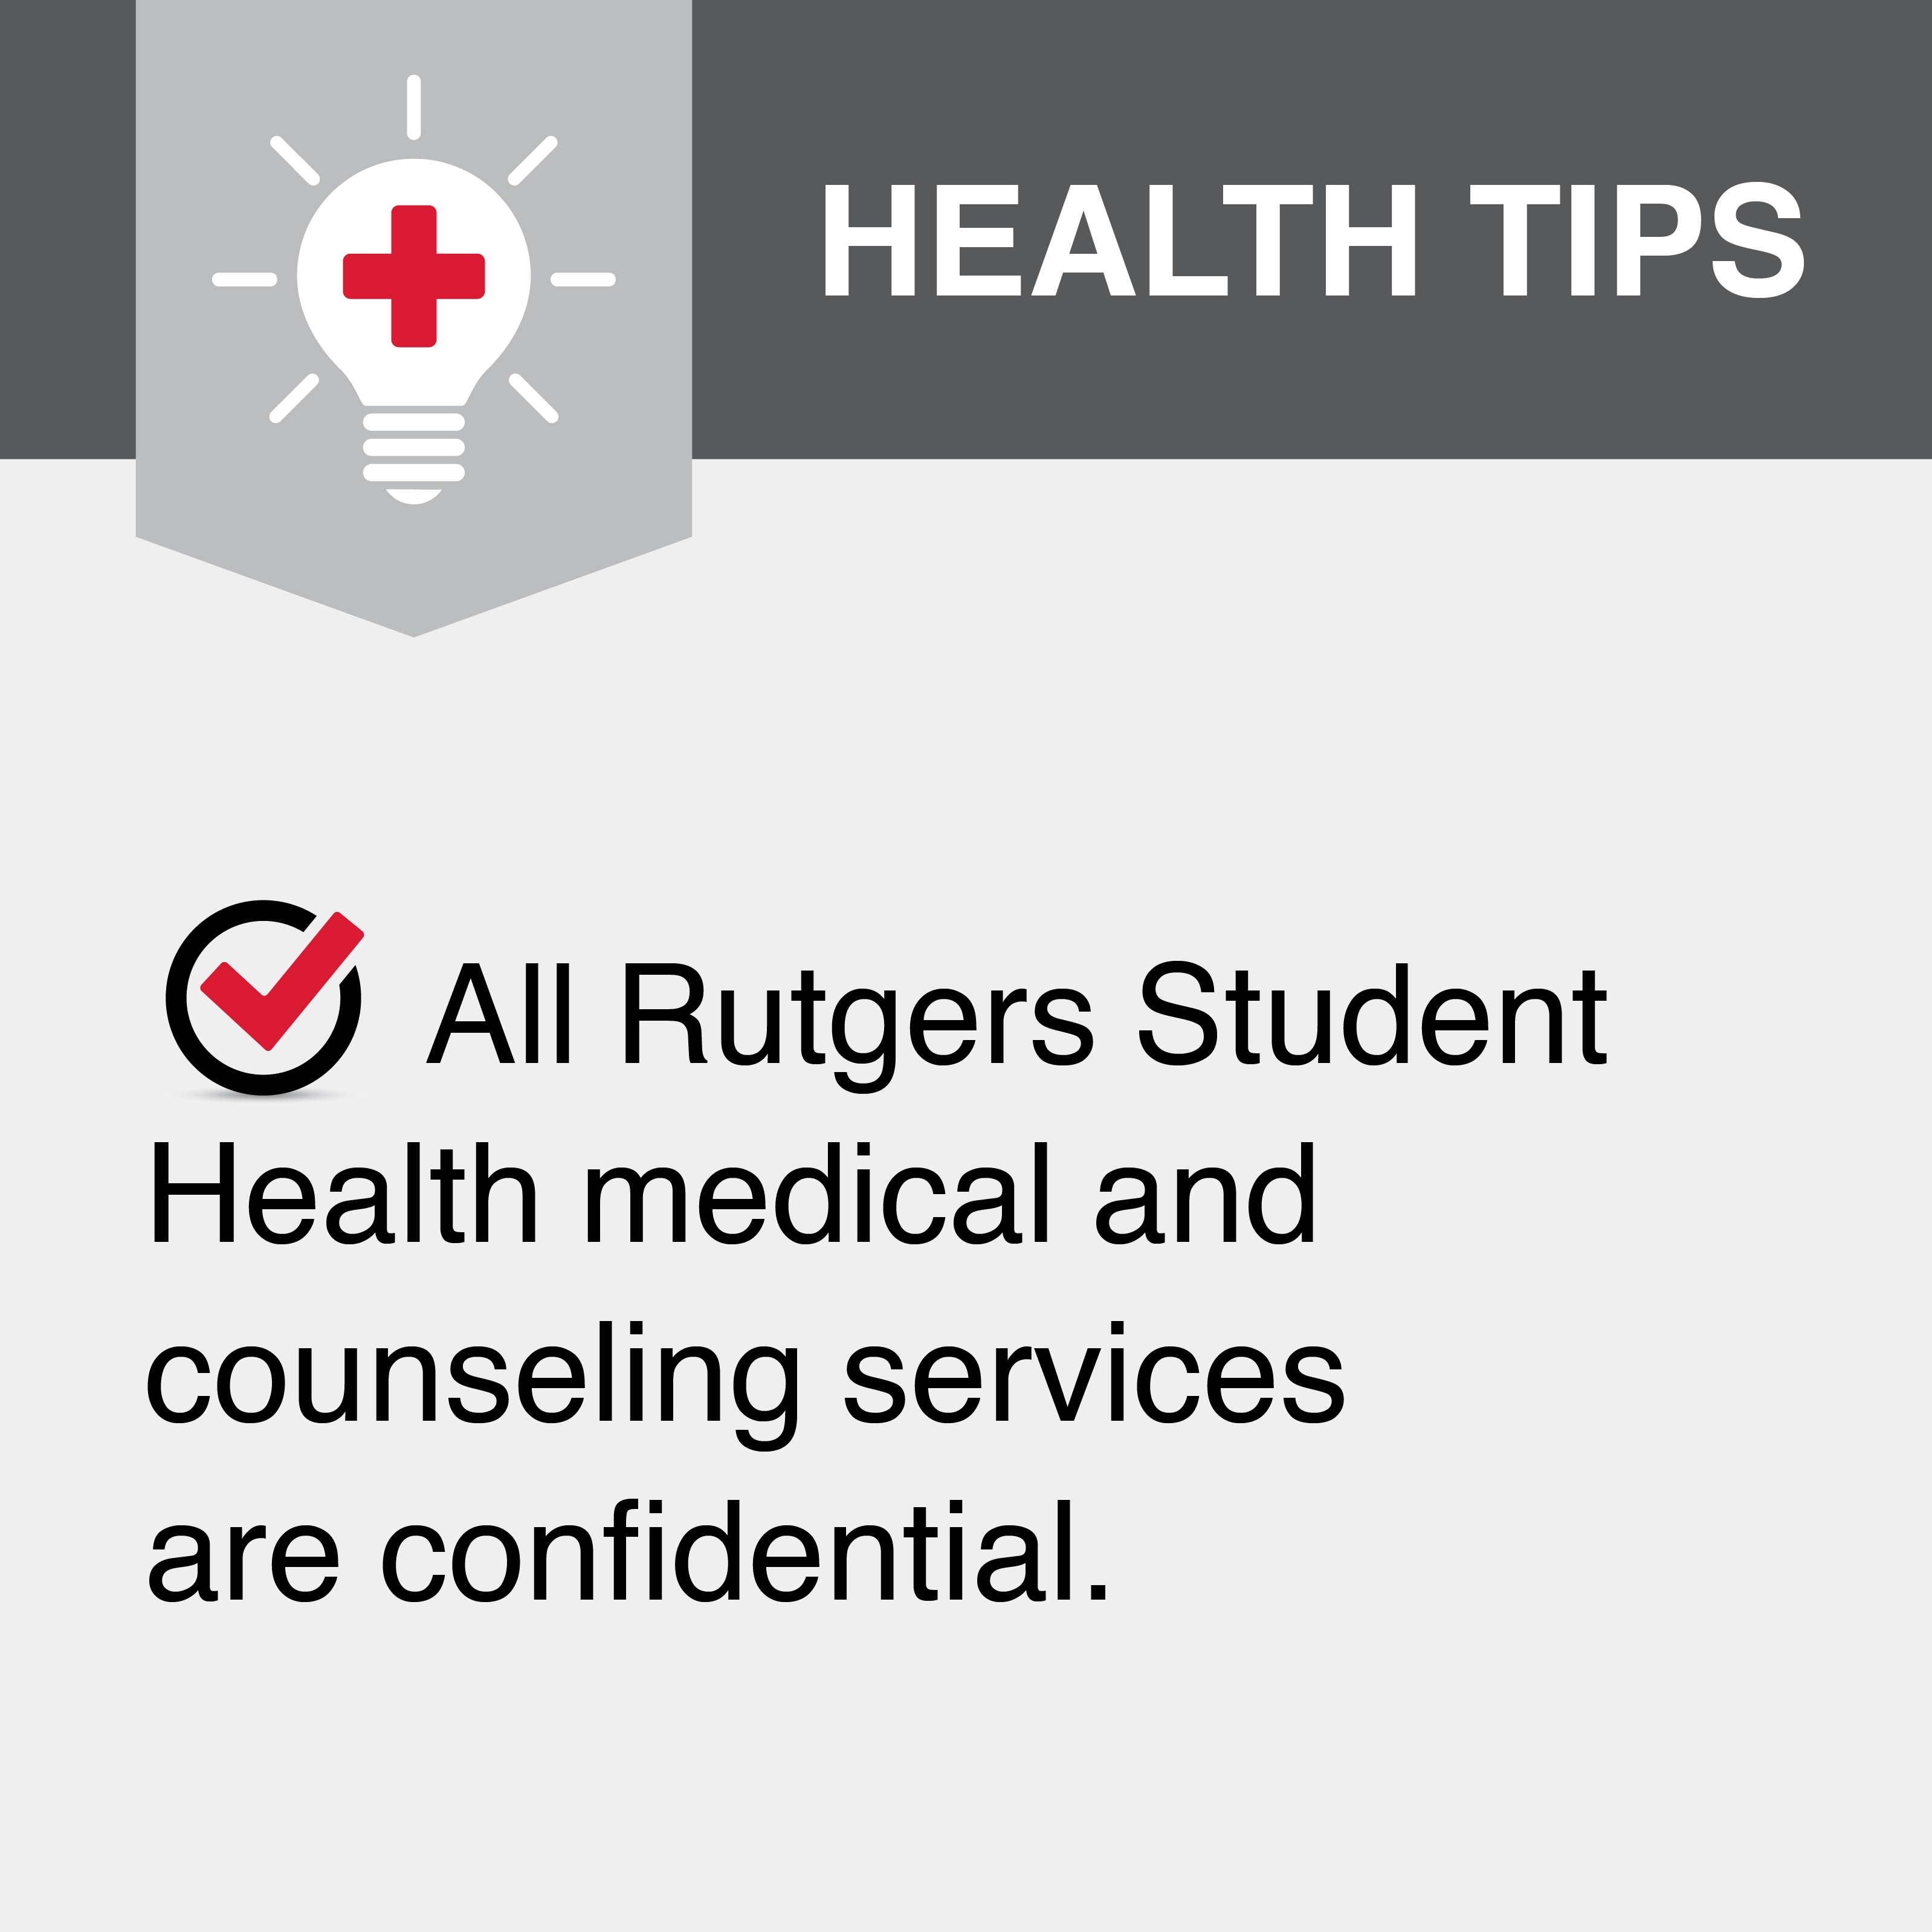 All Rutgers Student Health medical and counseling services are confidential.